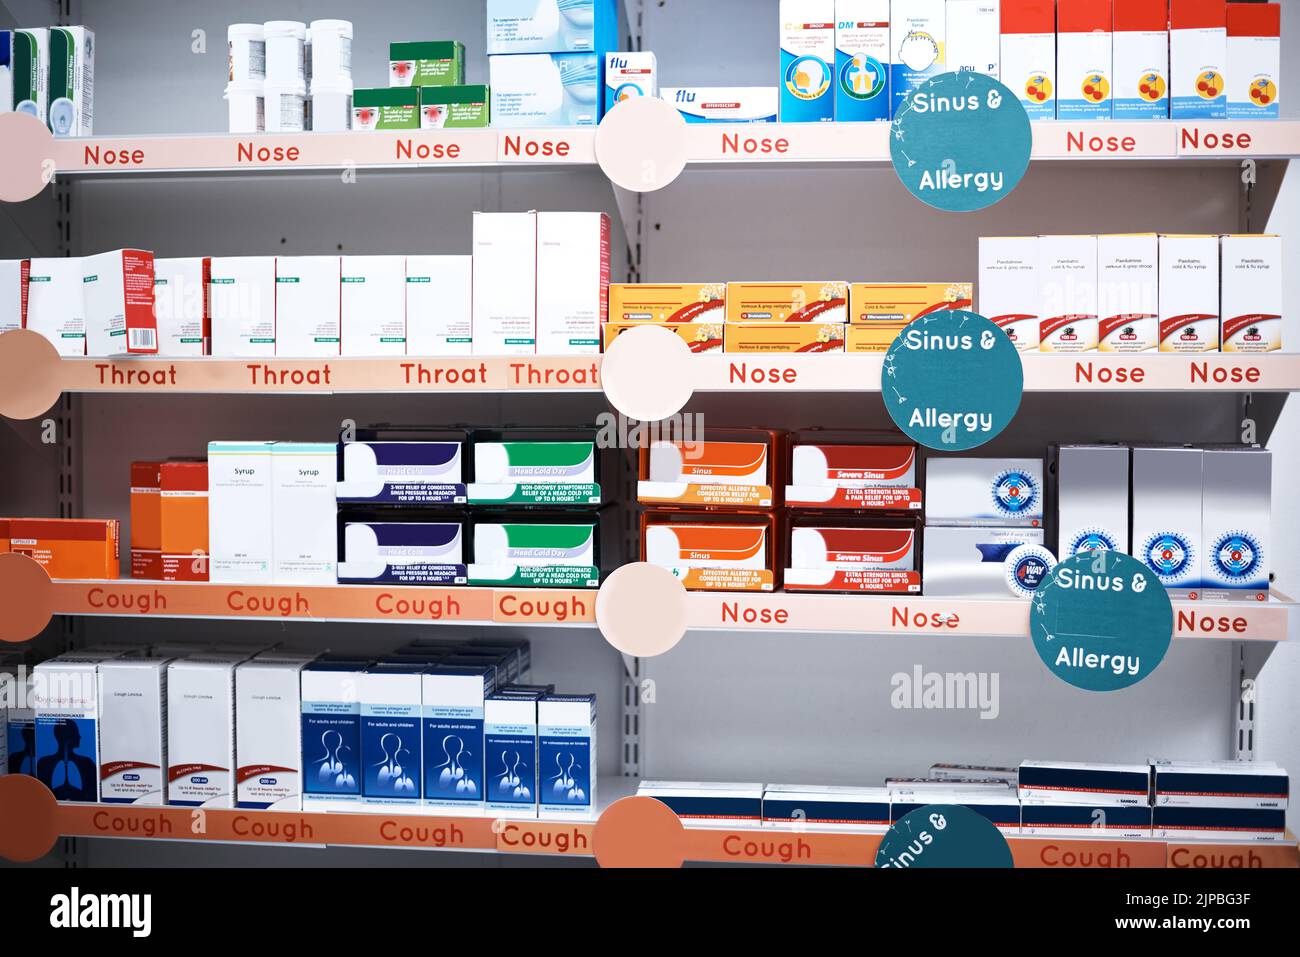 Weve got a broad range on offer. shelves stocked with various medicinal products in a pharmacy. Stock Photo